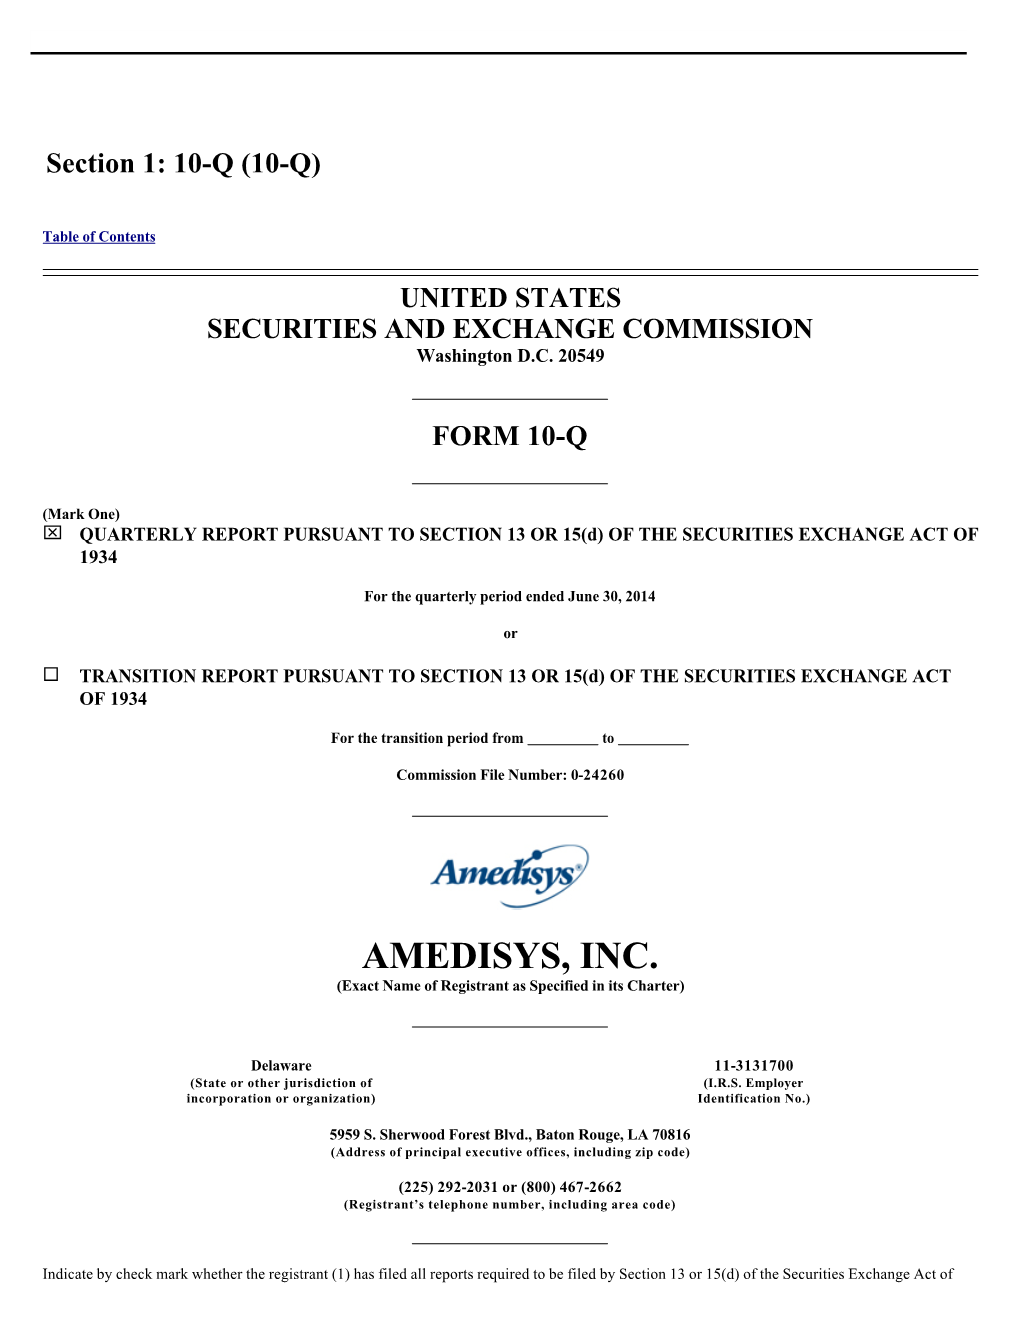 AMEDISYS, INC. (Exact Name of Registrant As Specified in Its Charter)